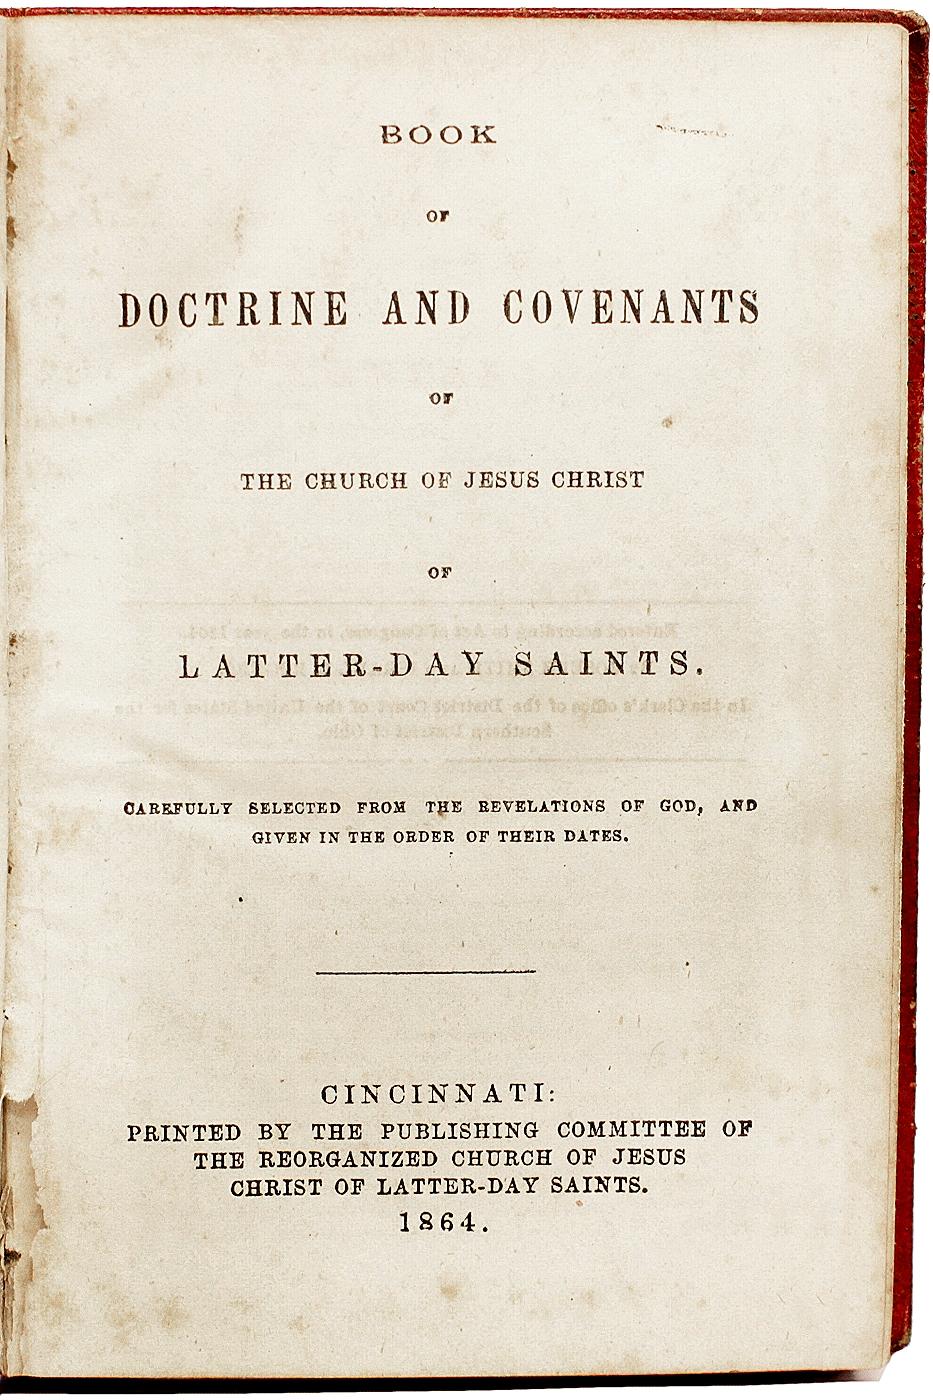 AUTHOR: SMITH, Joseph - Reorganized Church of Jesus Christ of Latter Day Saints. 

TITLE: Book of Doctrine and Covenants of the Church of Jesus Christ of Latter-Day Saints.

PUBLISHER: Cincinnati: Printed by the Publishing Committee of the